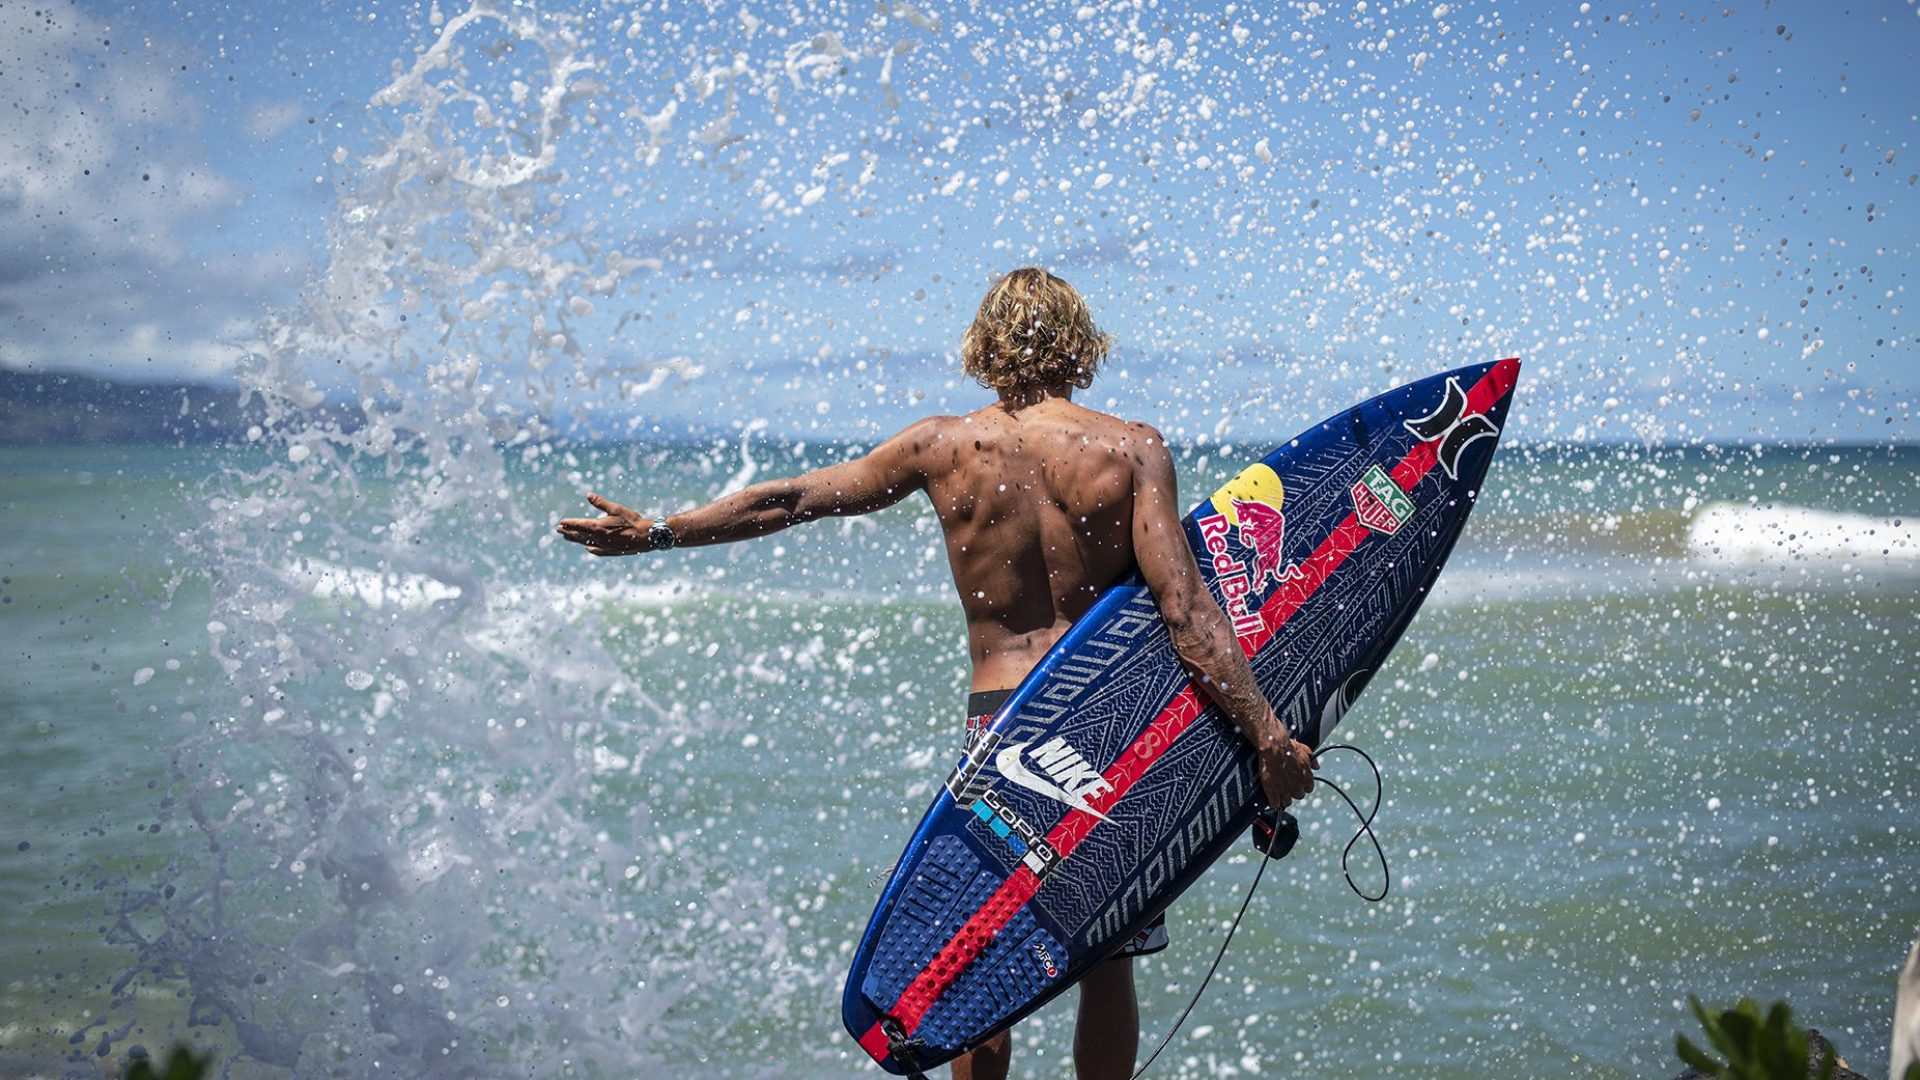 The World Loves Surfing  Best Of Red Bull Surfing 2021 